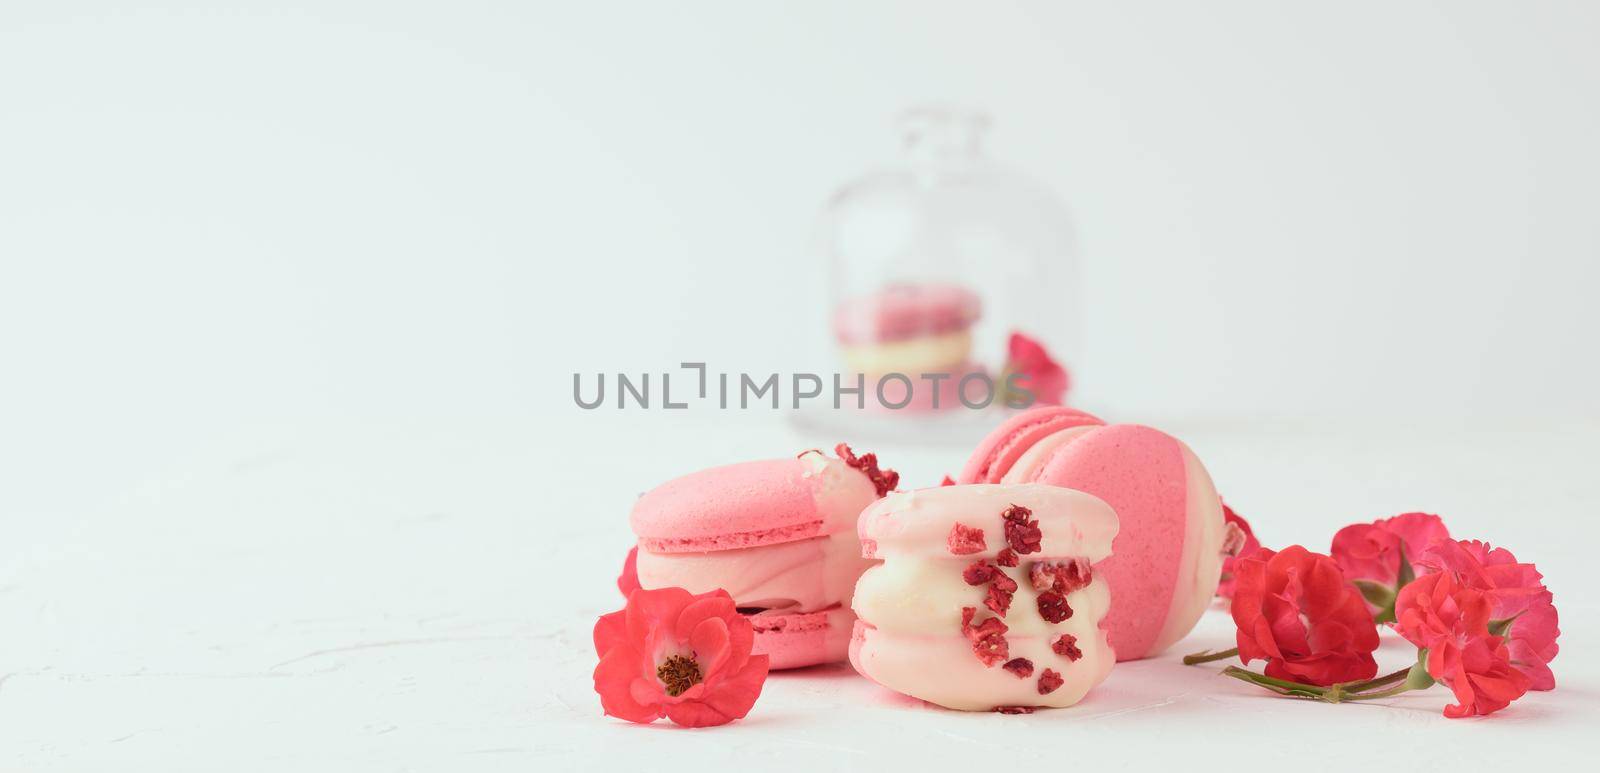 baked red strawberry macarons and rosebuds on a white table, gourmet almond flour dessert by ndanko